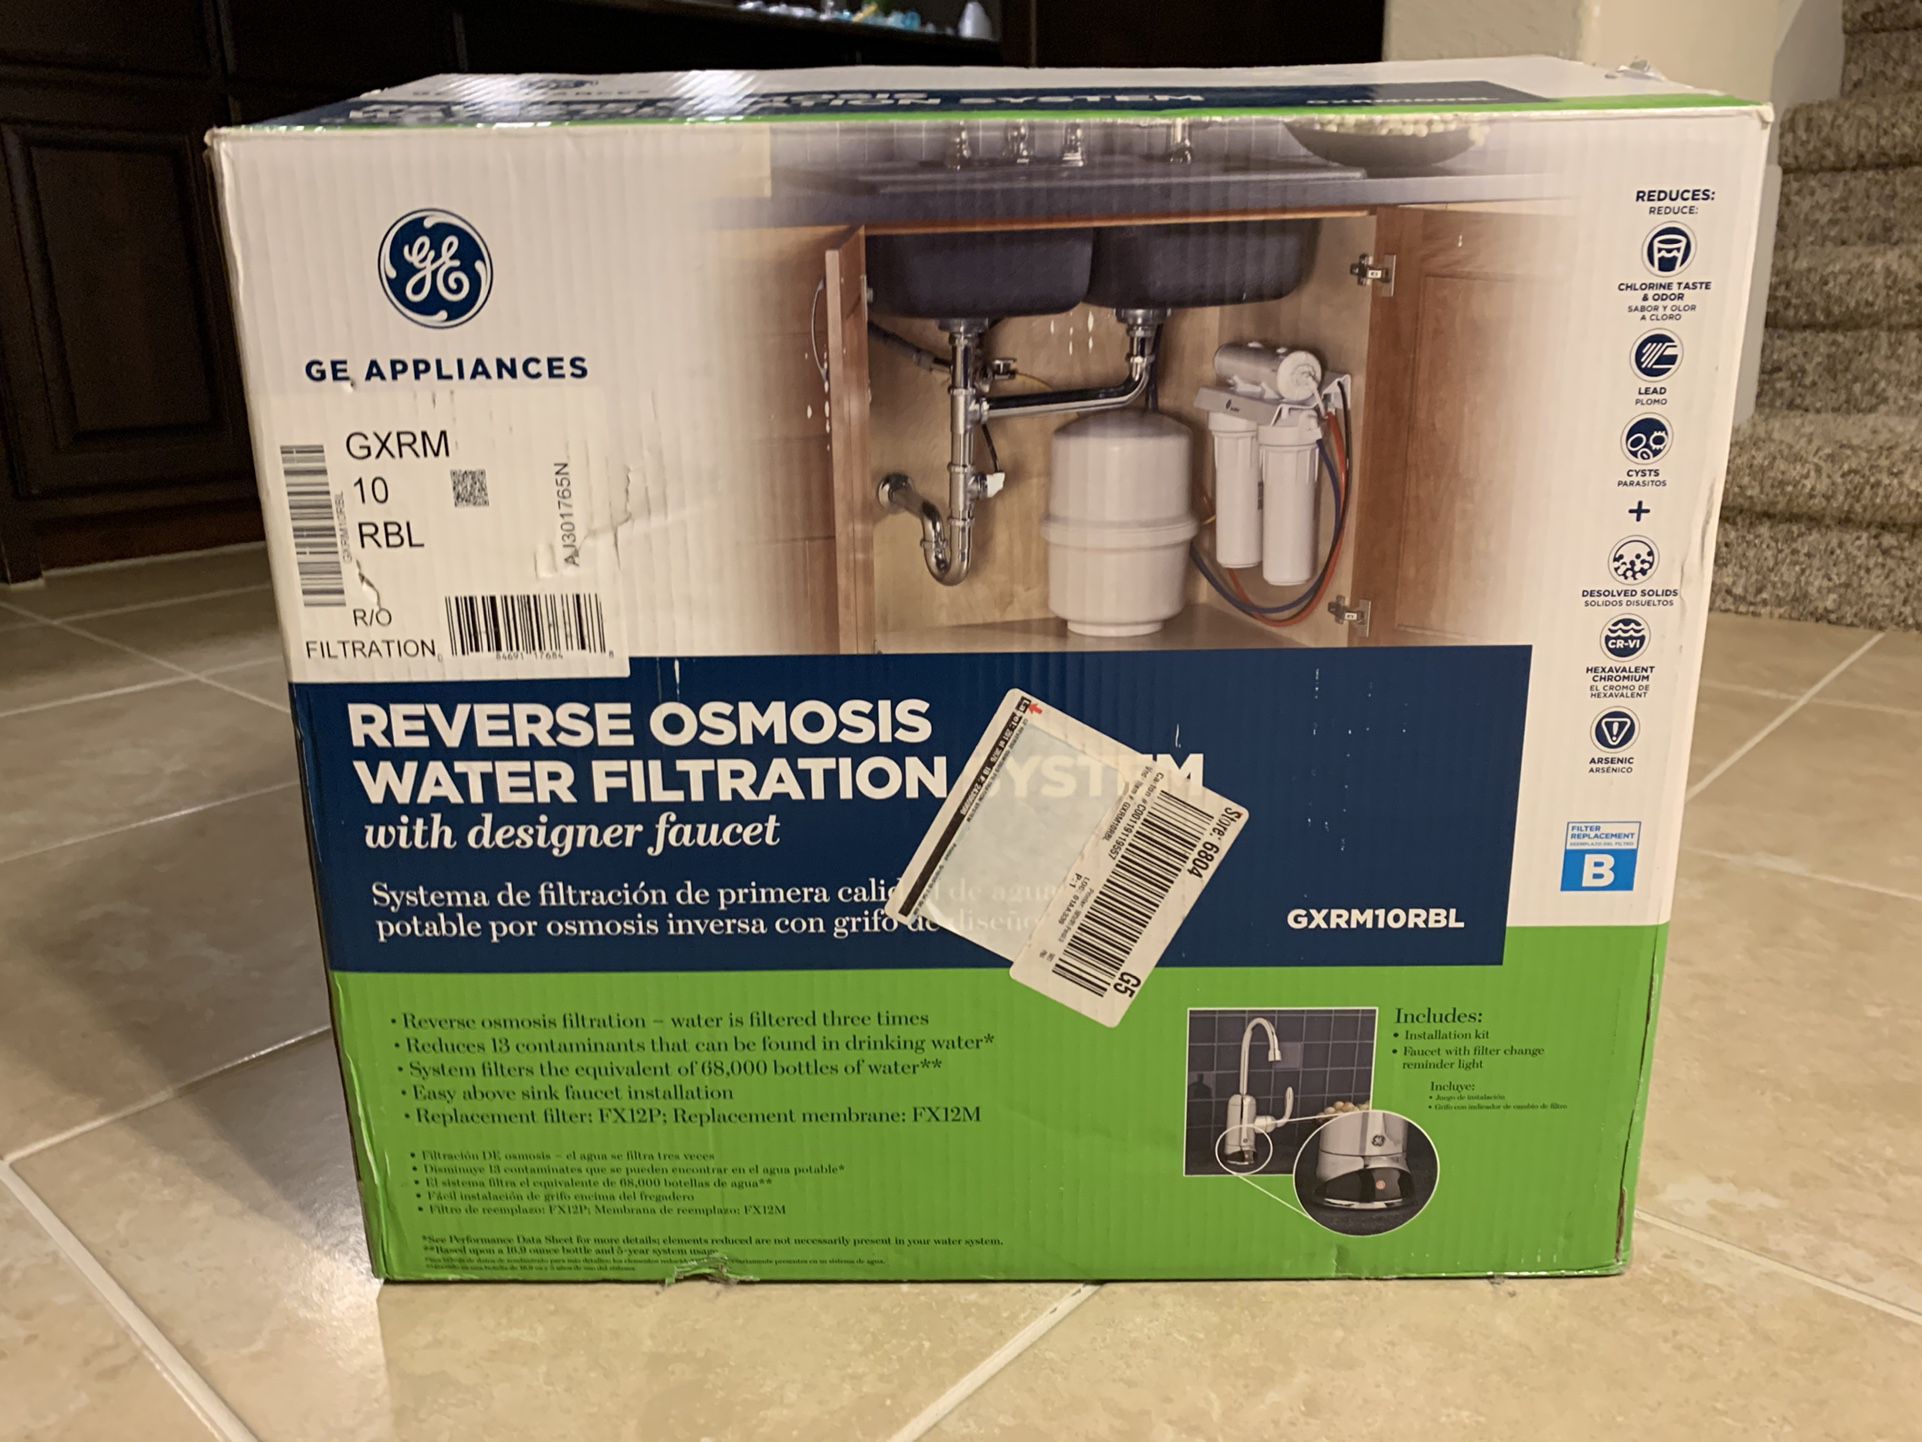 GE Reverse Osmosis Water Filtration System - Open Box Brand New